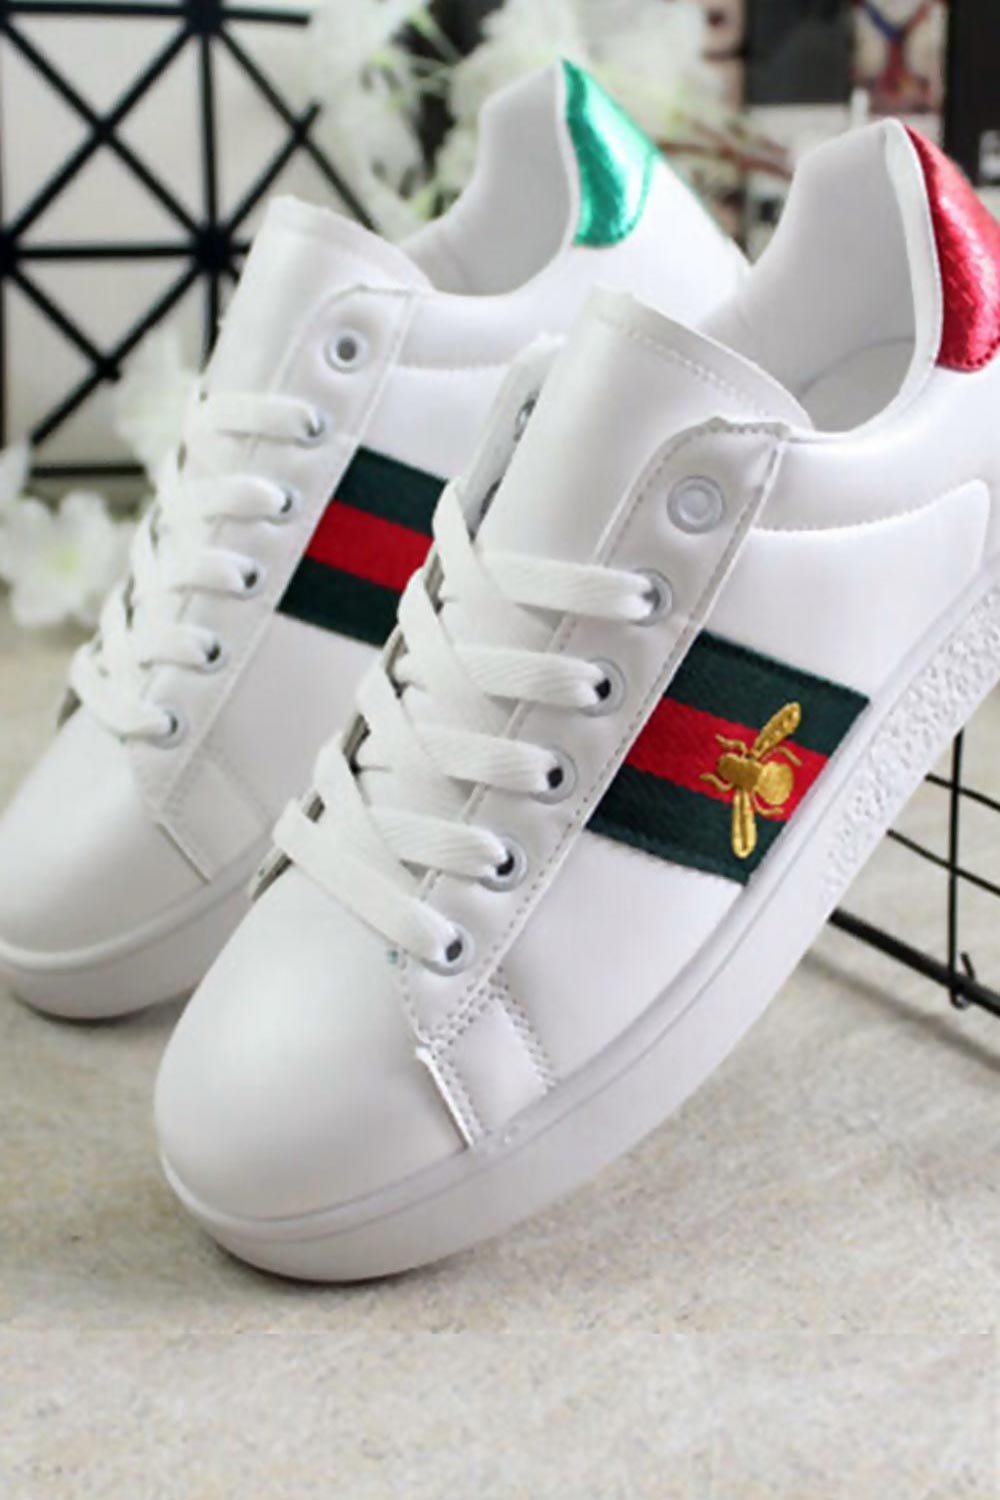 gucci green and red trainers